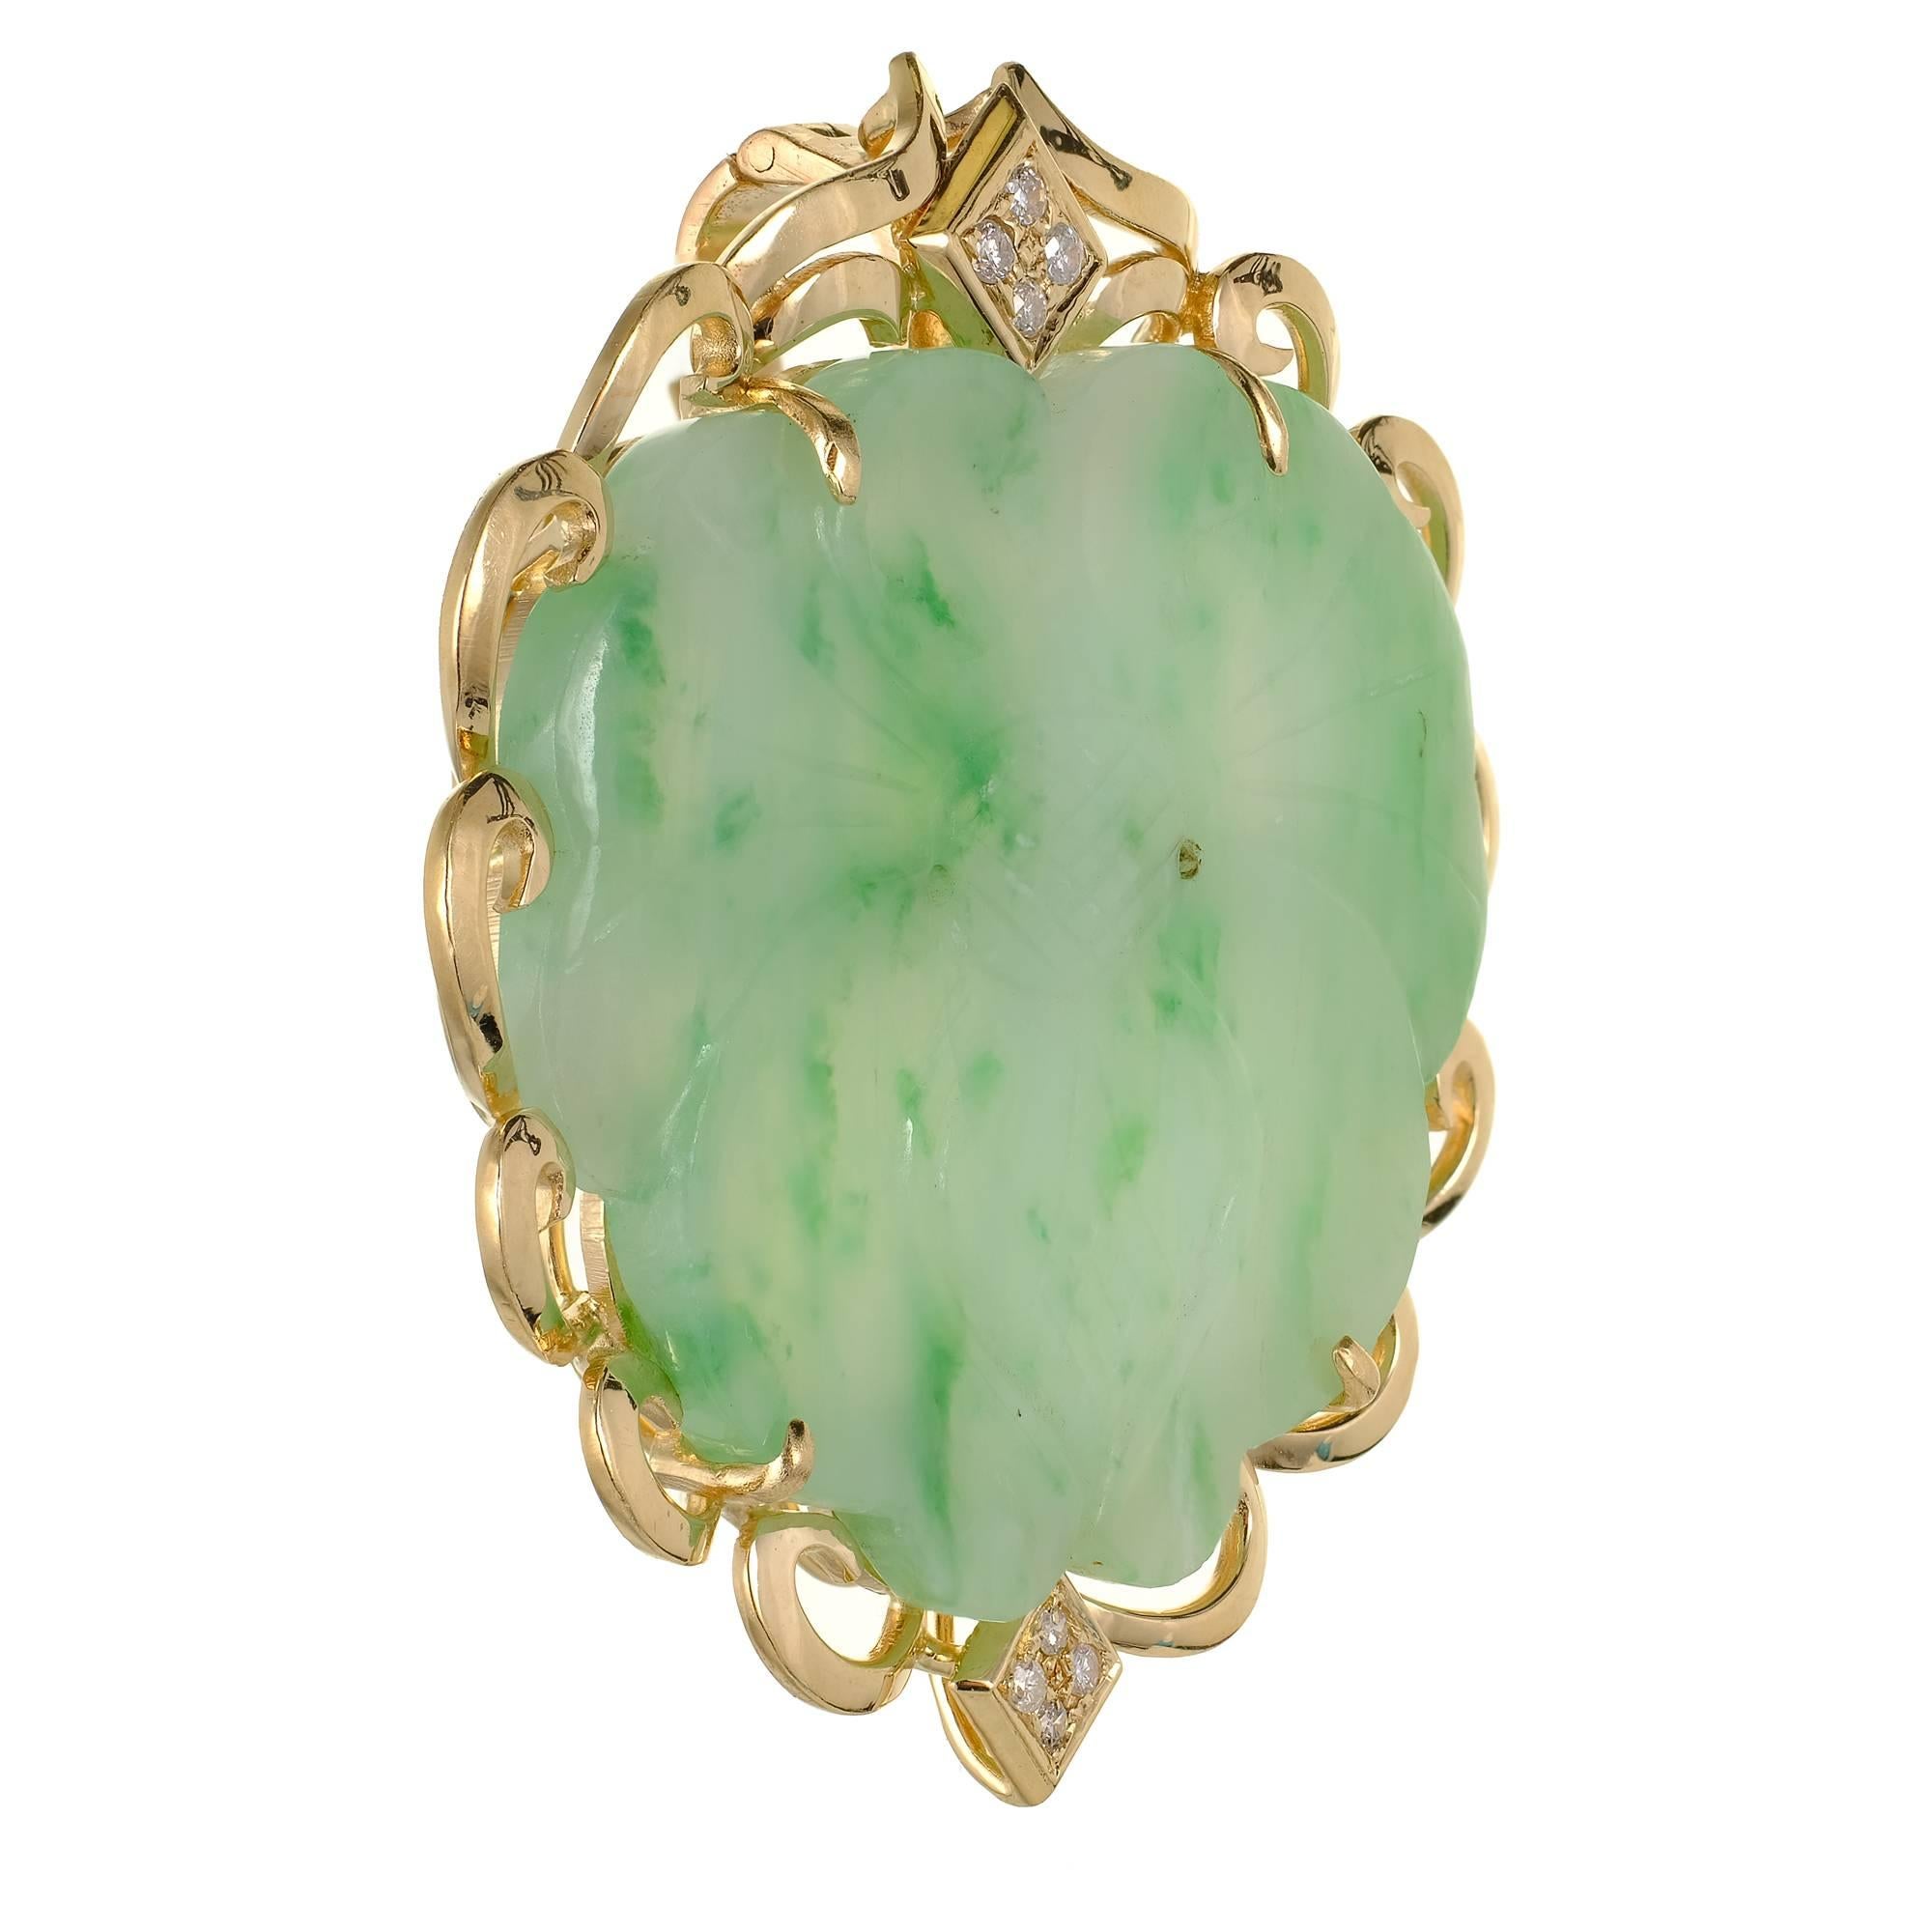 GIA Certified Natural Jadeite Jade mottled green and diamond enhancer pendant brooch combination in a handmade 14k gold frame. Mottled green color carved Jade. Chain not included.

1 pierced carved mottled green Jadeite Jade, 33.05 x 24.3 x 2.75mm,